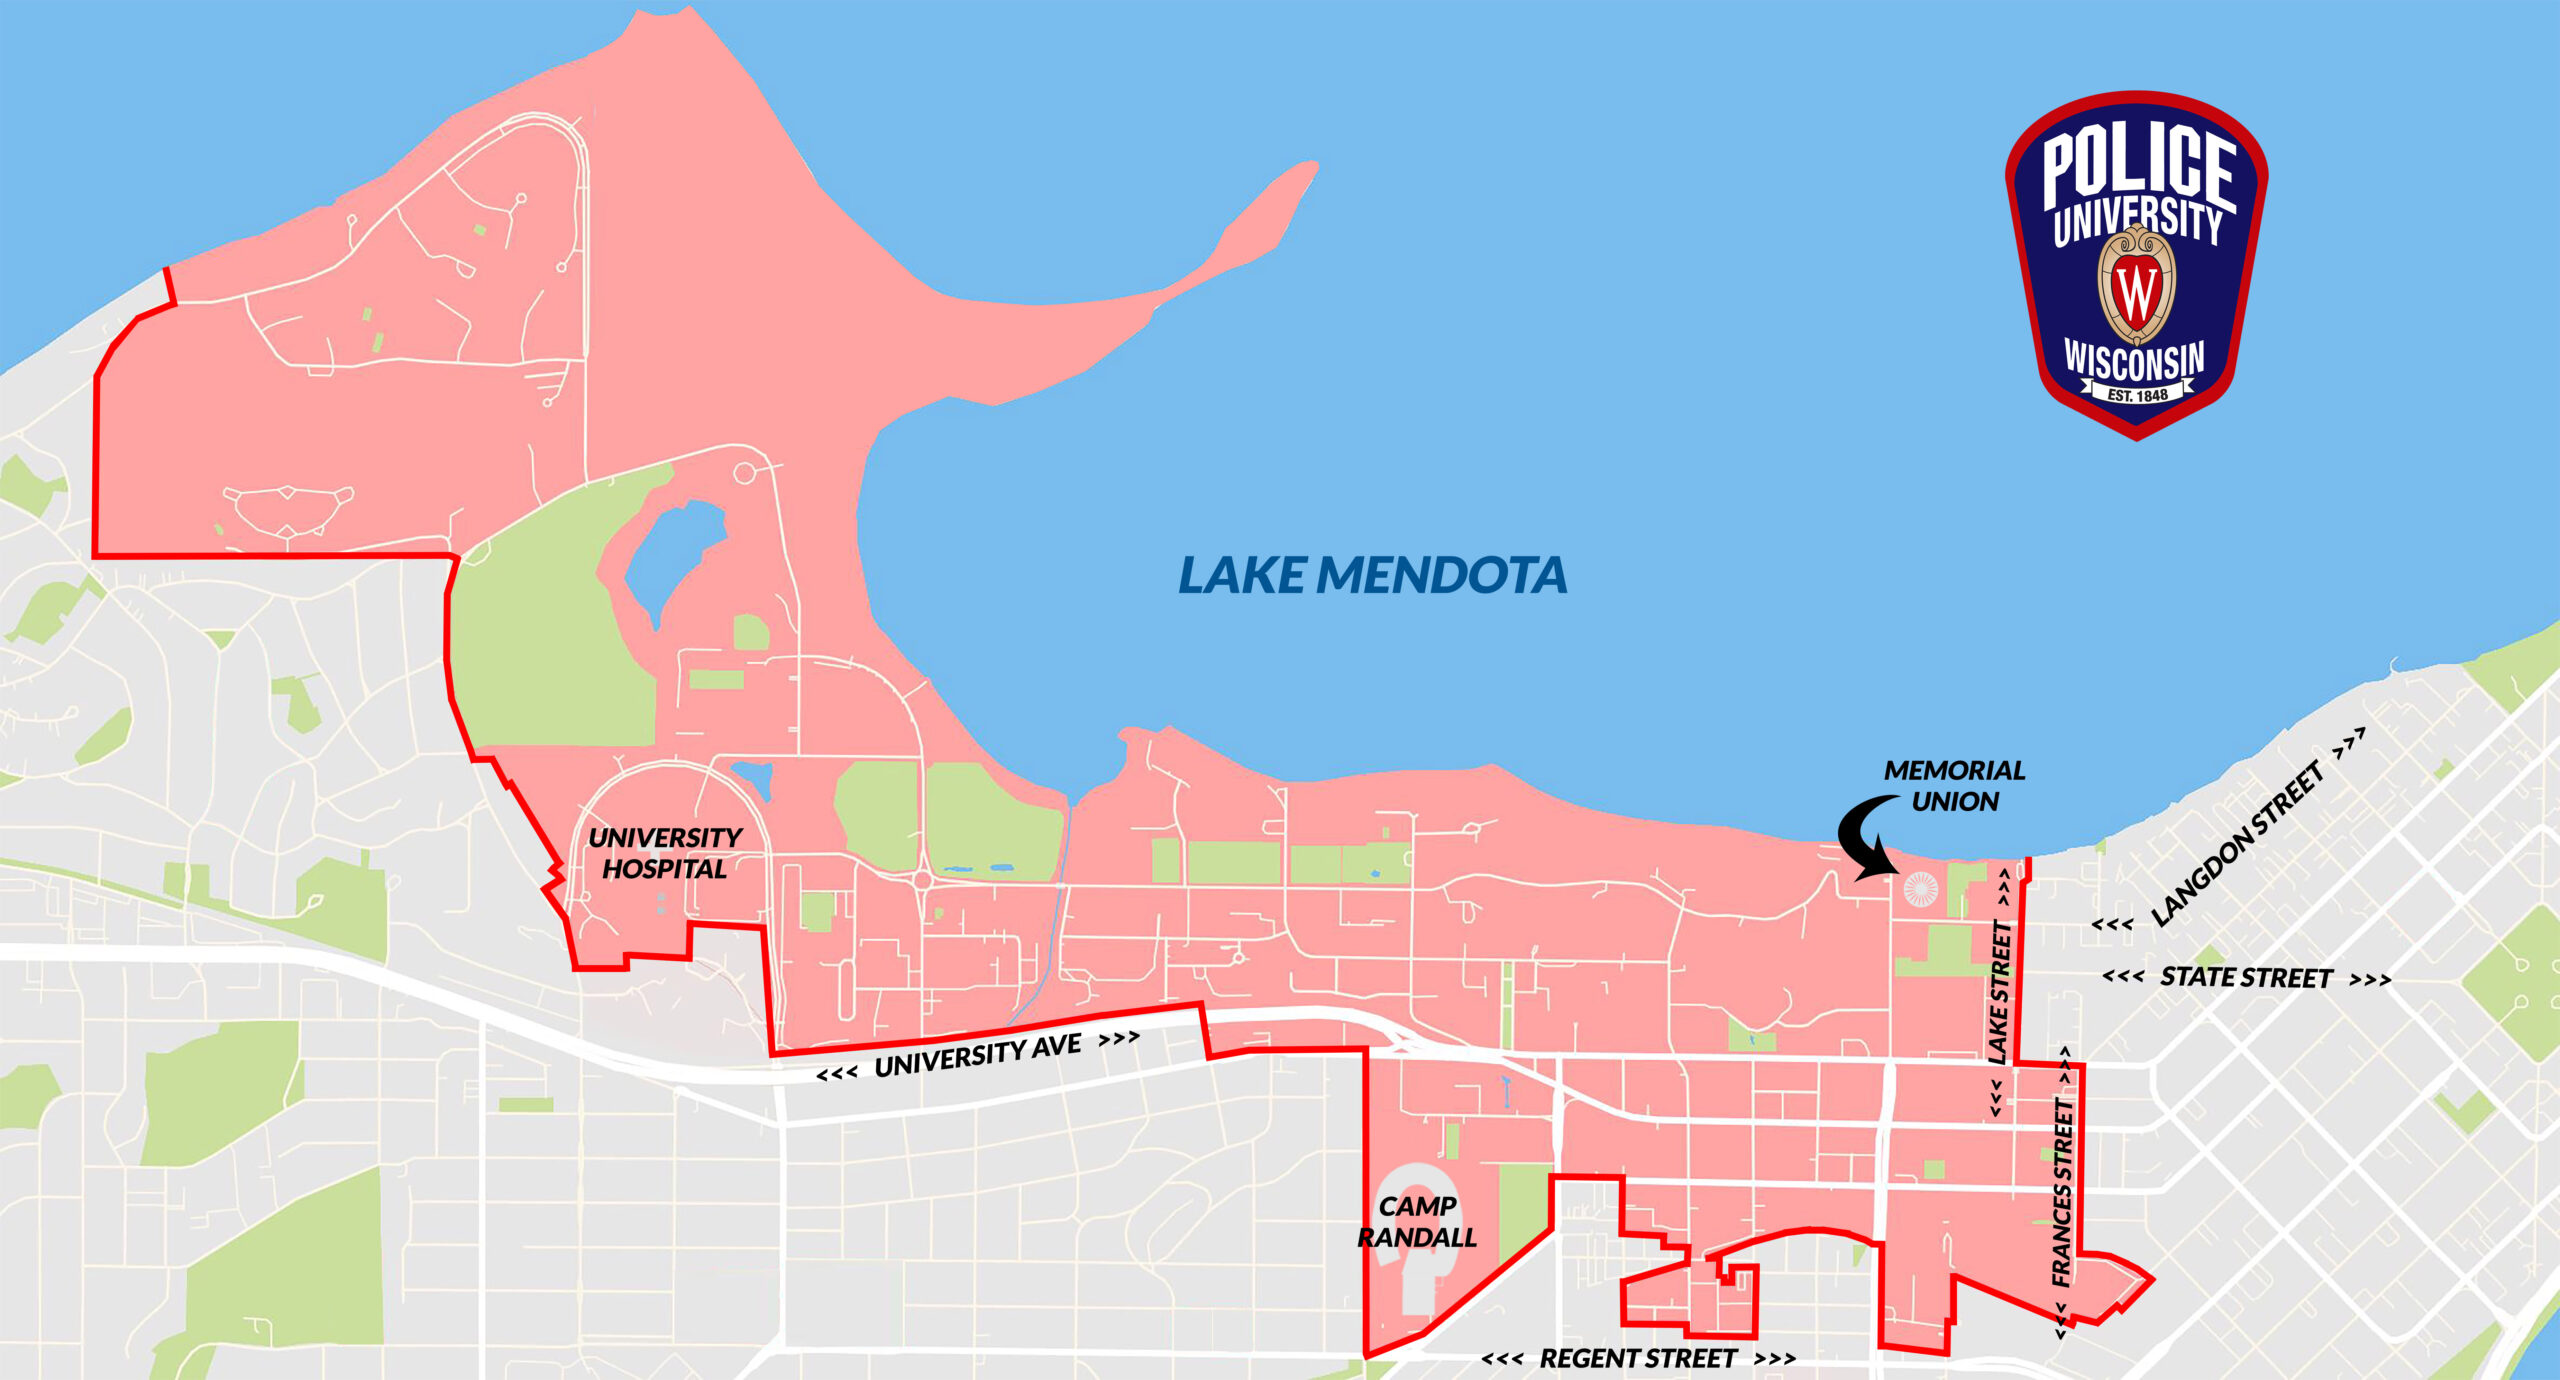 A map of the UW-Madison campus that shows the boundaries of UWPD's patrol jurisdiction.